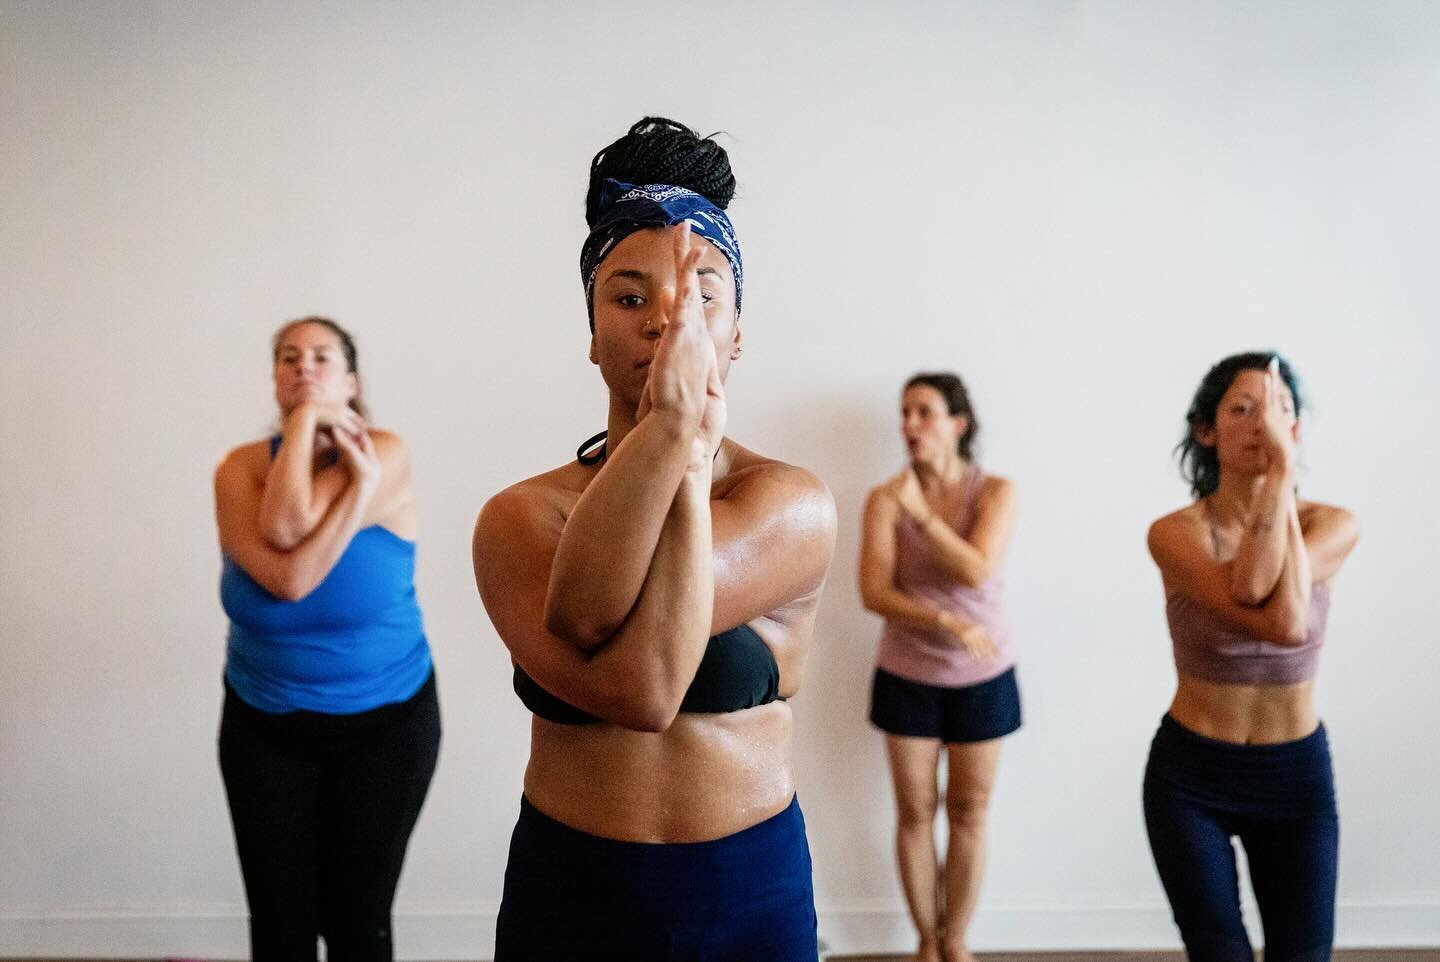 We take great pride in providing classes and services led by certified, experienced instructors and practitioners. Our primary goal is to motivate you to develop a consistent practice that enriches your overall well-being. With our dedicated team, yo